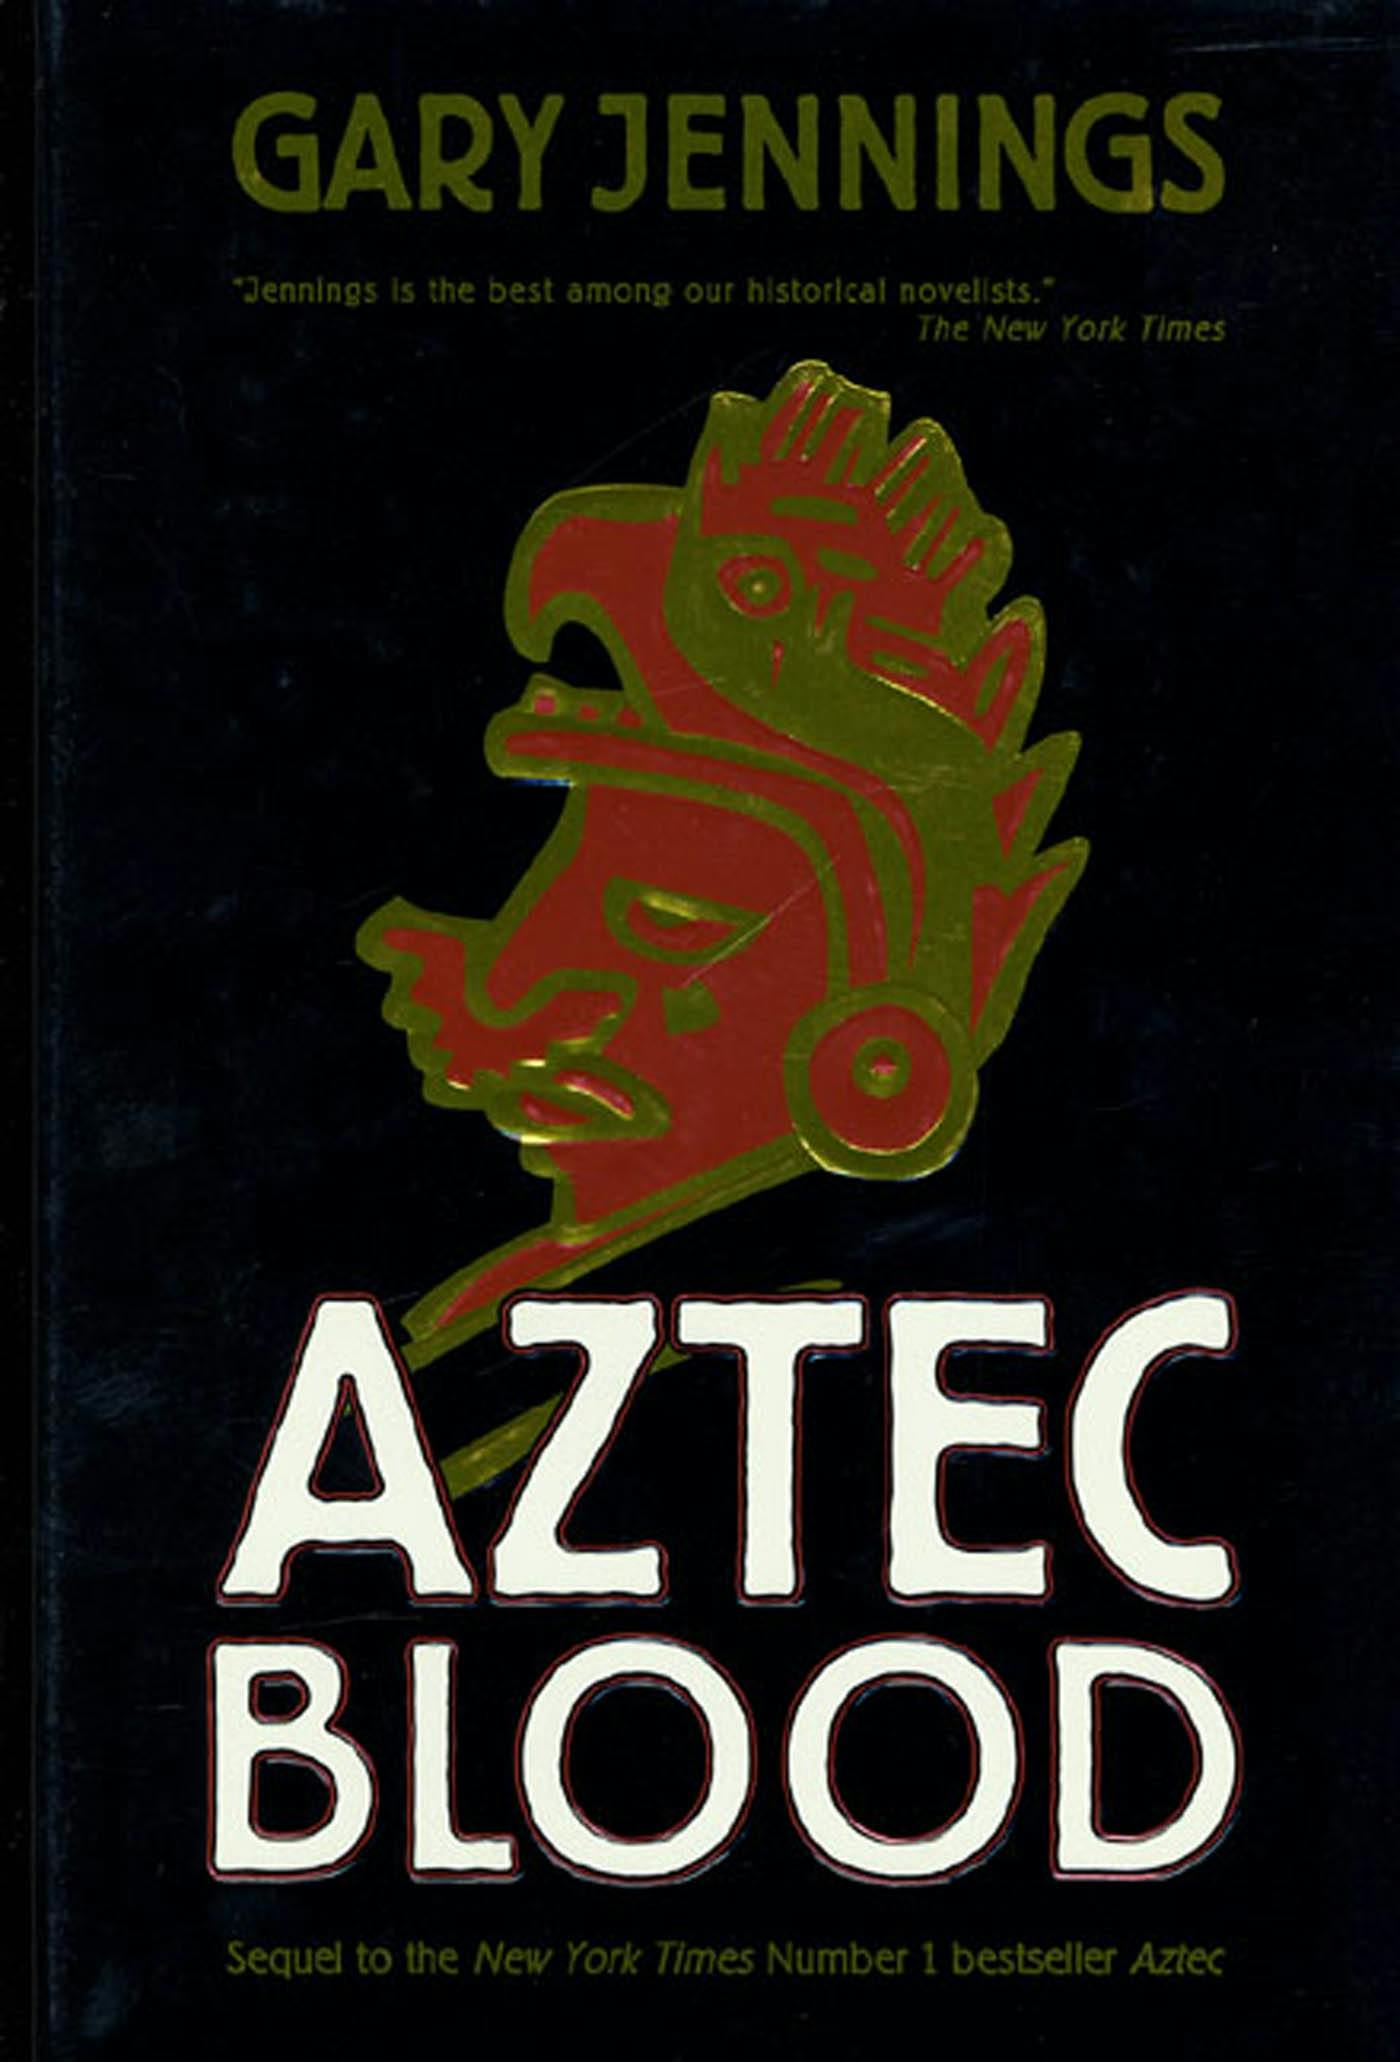 Cover for the book titled as: Aztec Blood